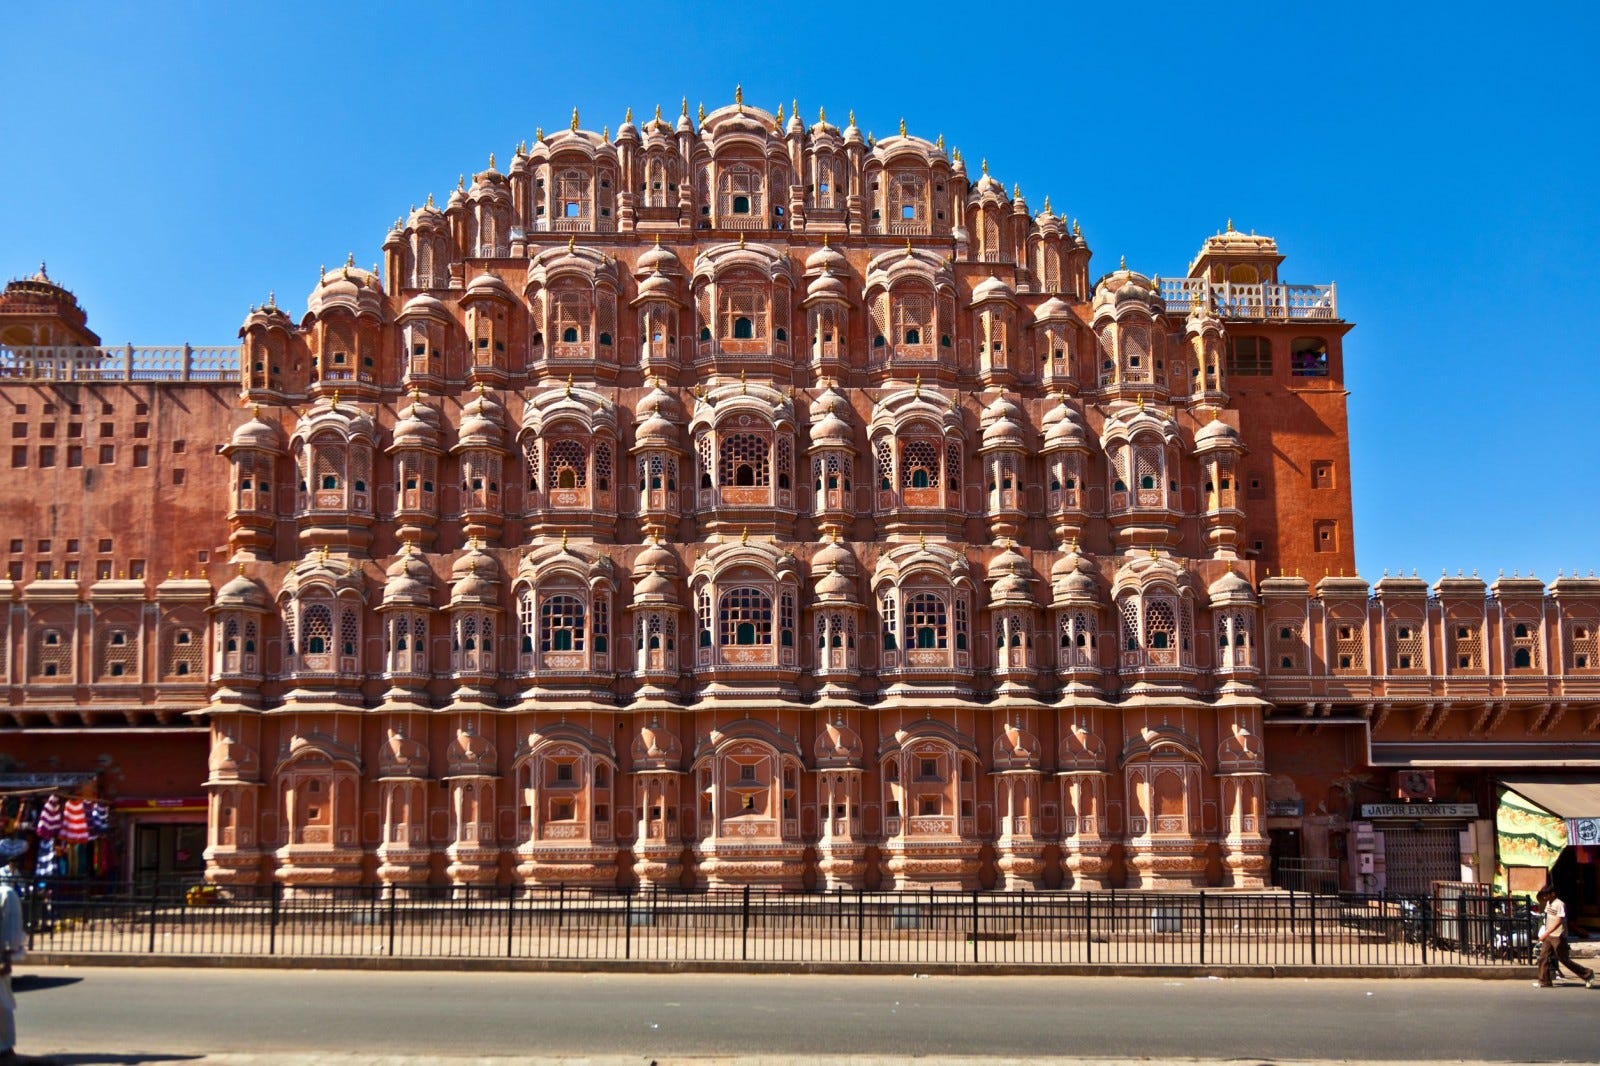 Tourist Attractions in Jaipur. Jaipur, also called the Pink City, is a